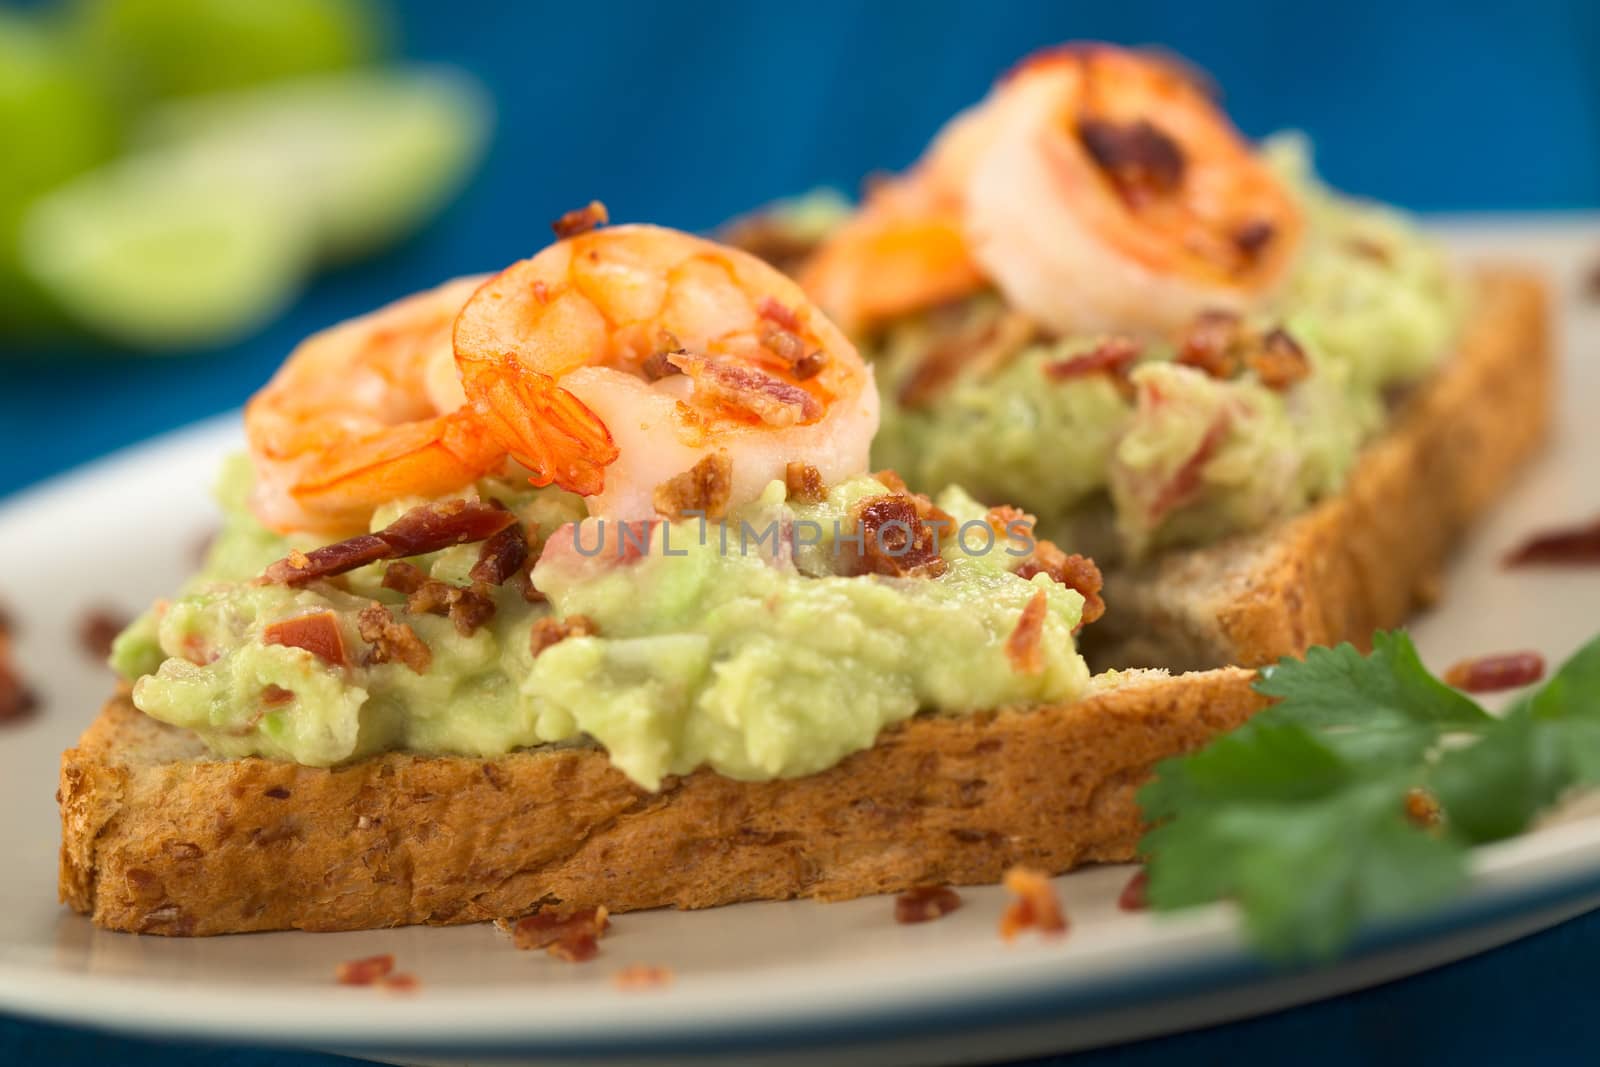 Wholegrain toast bread slices with guacamole, fried shrimp and fried bacon pieces served on plate on blue wood (Selective Focus, Focus on the front of the shrimp in the middle) 